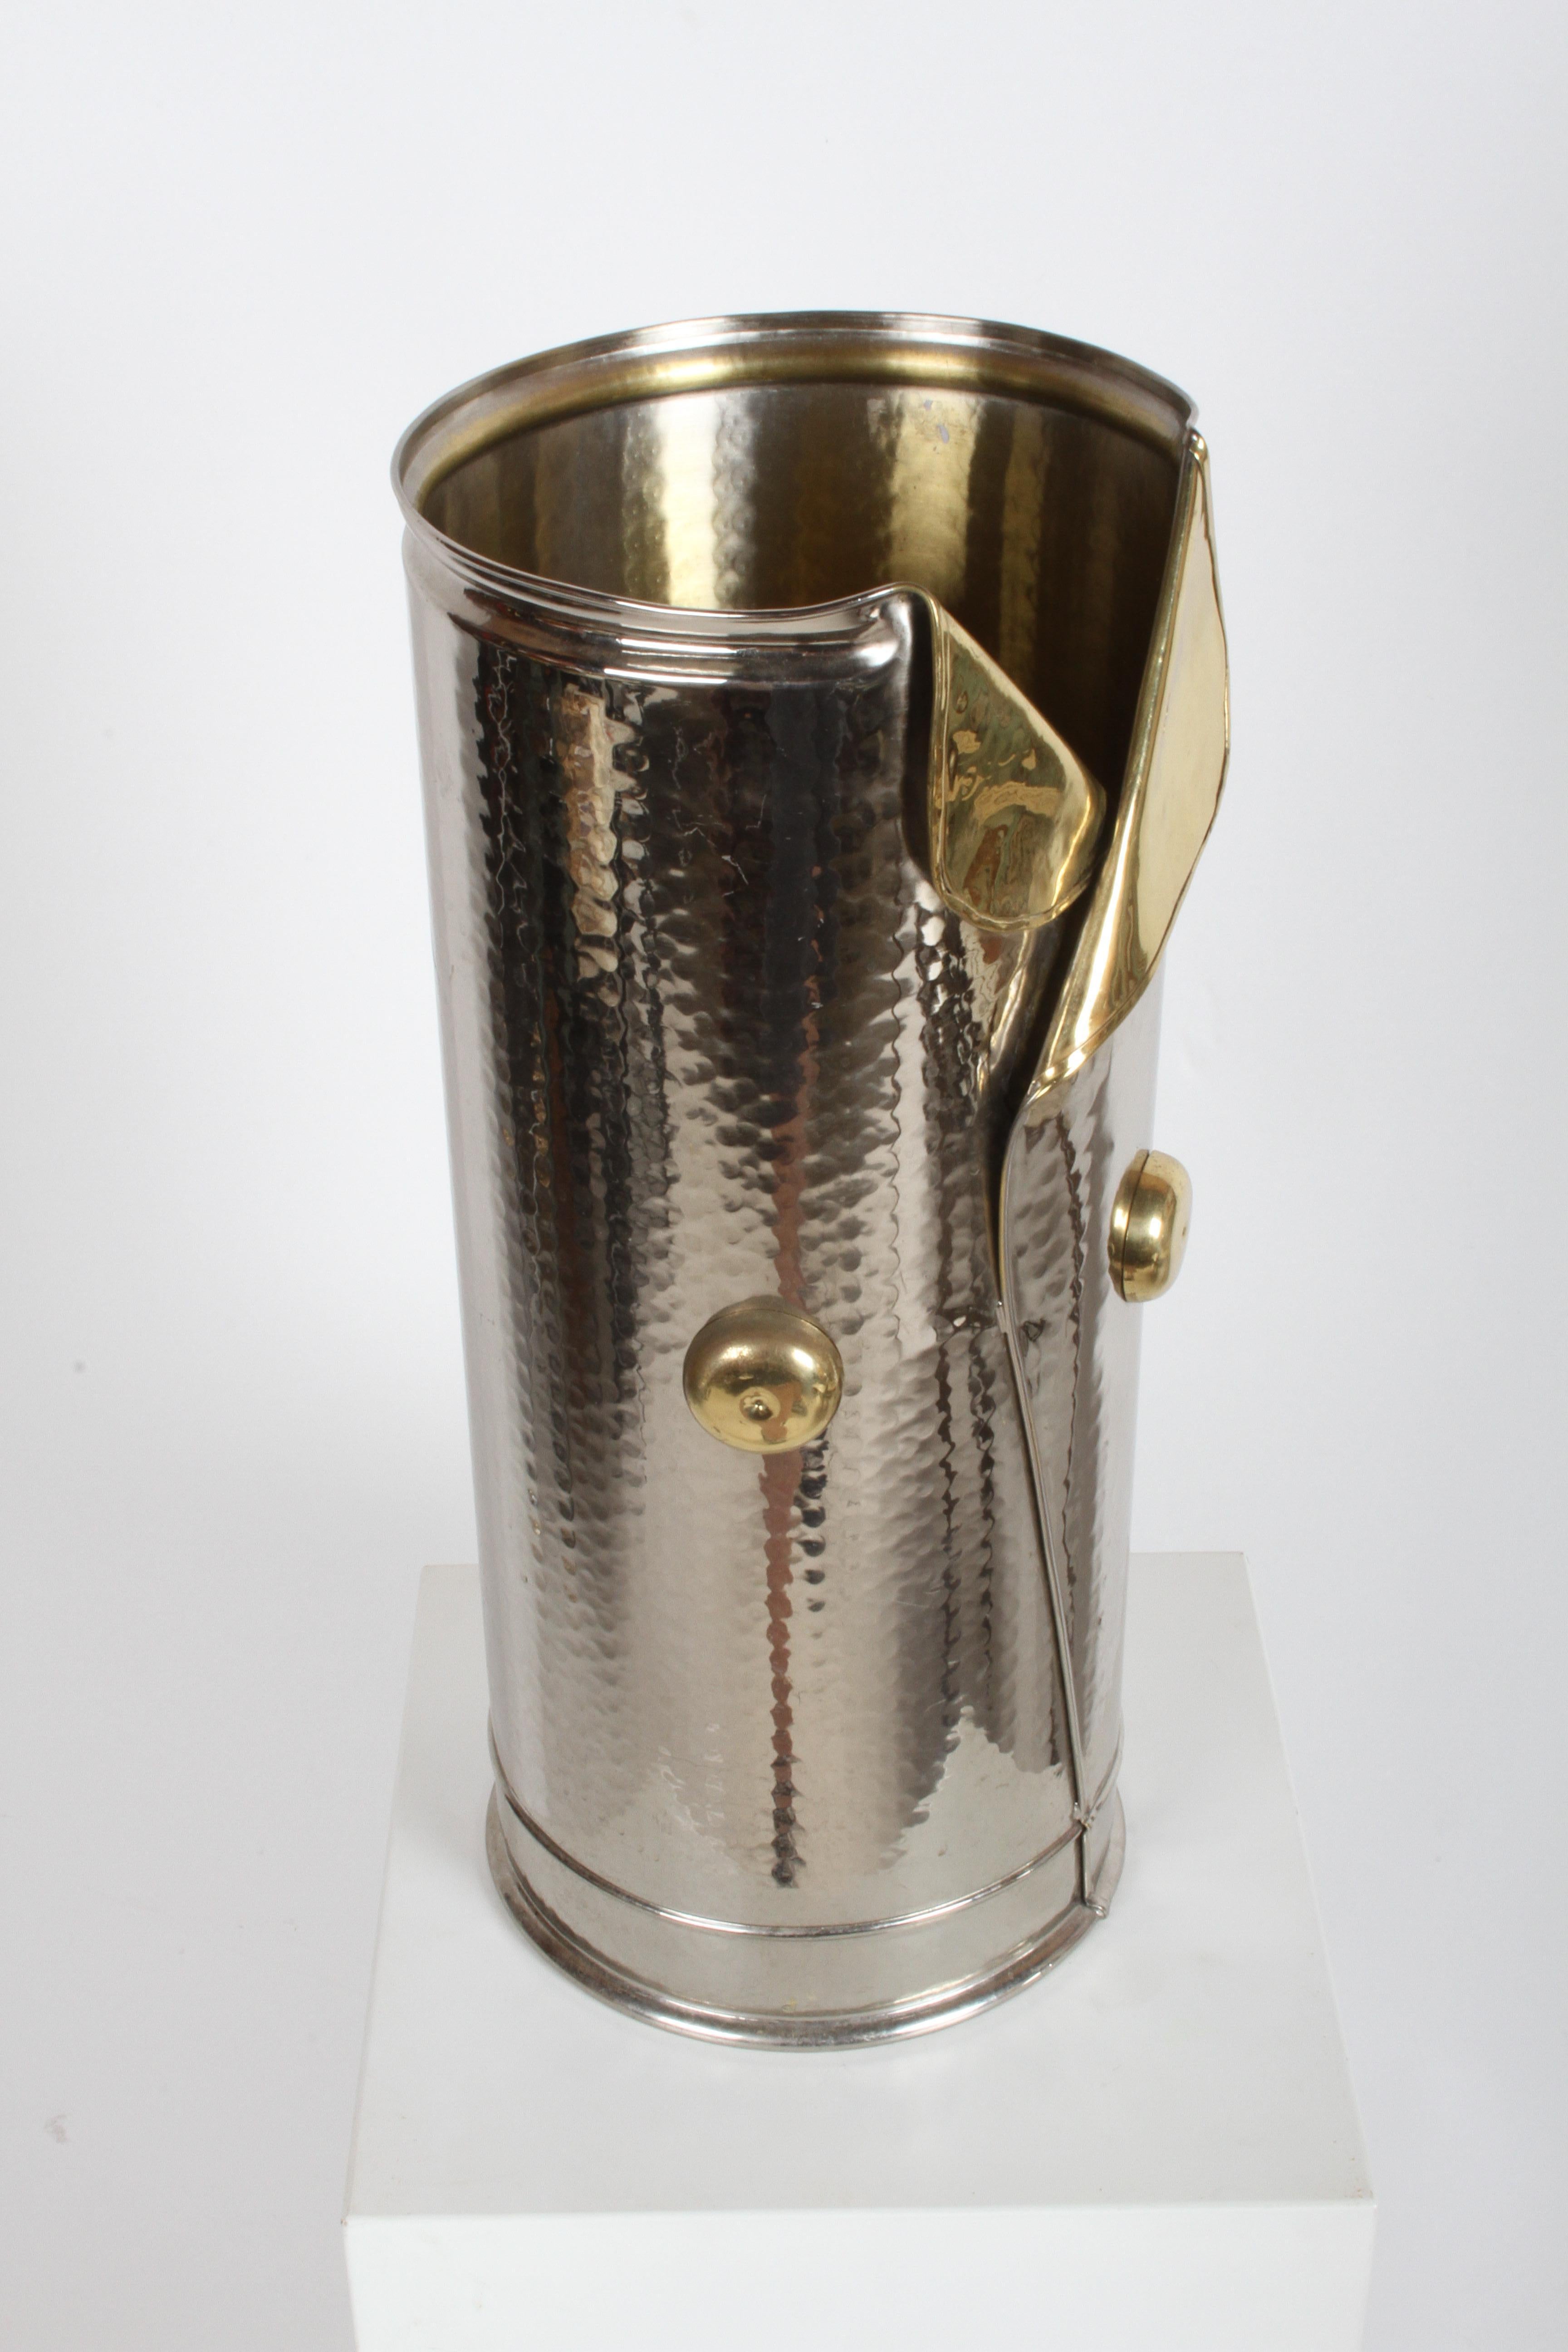 Nickel & brass hammered exterior umbrella stand or holder from the 1970s or early 1980s, in the form vest with buttons. Labeled Made in Italy. In the style of Gucci. Nice overall condition.